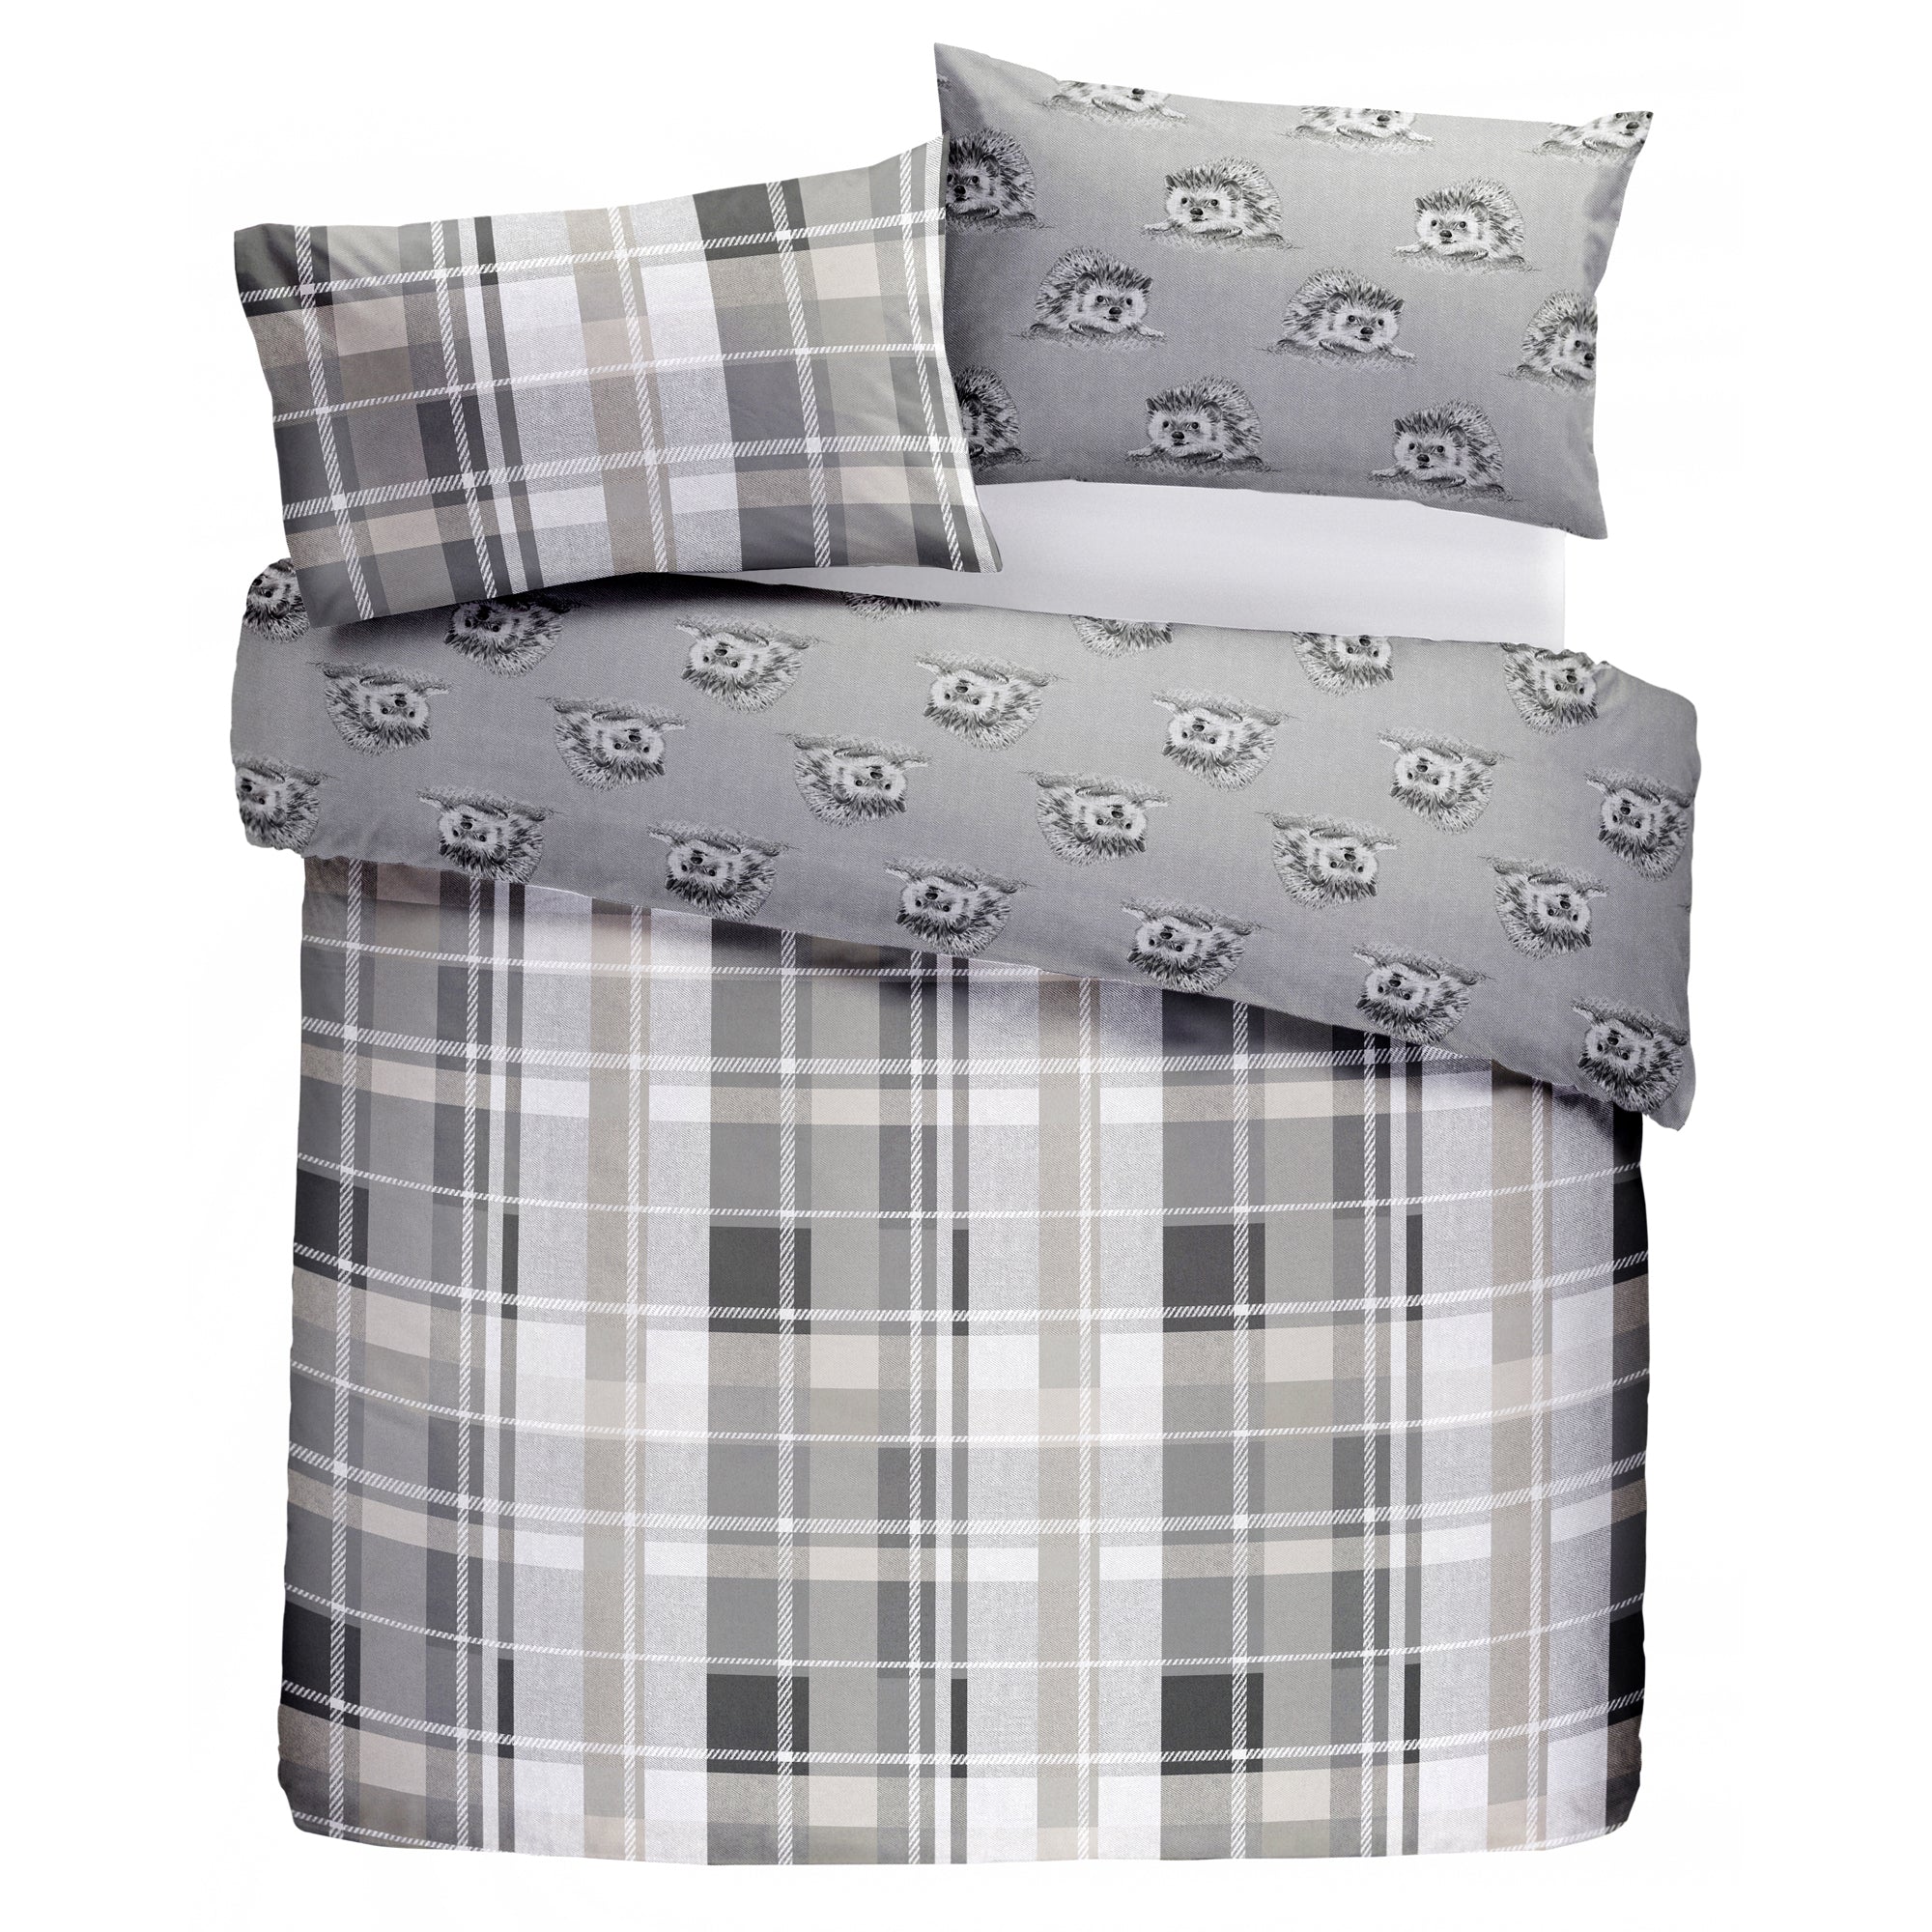 Colville Check Grey - 100% Brushed Cotton Checked Duvet Set - by D&D Lodge